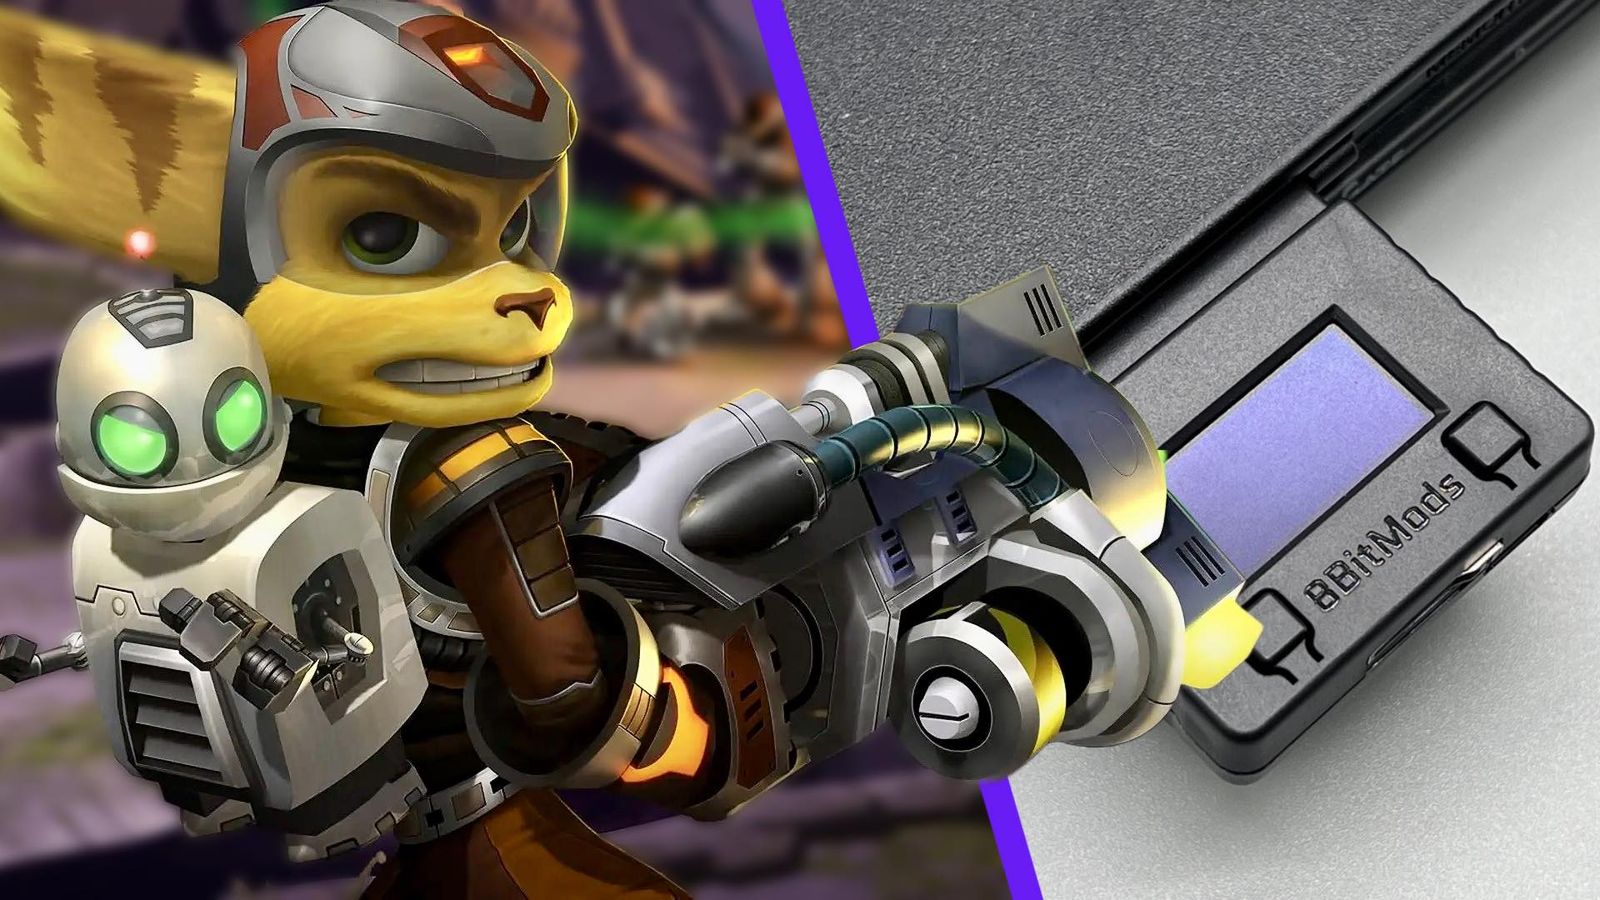 The MemCard Pro2 PS2 and PS1 memory card next to Ratchet and Clank 